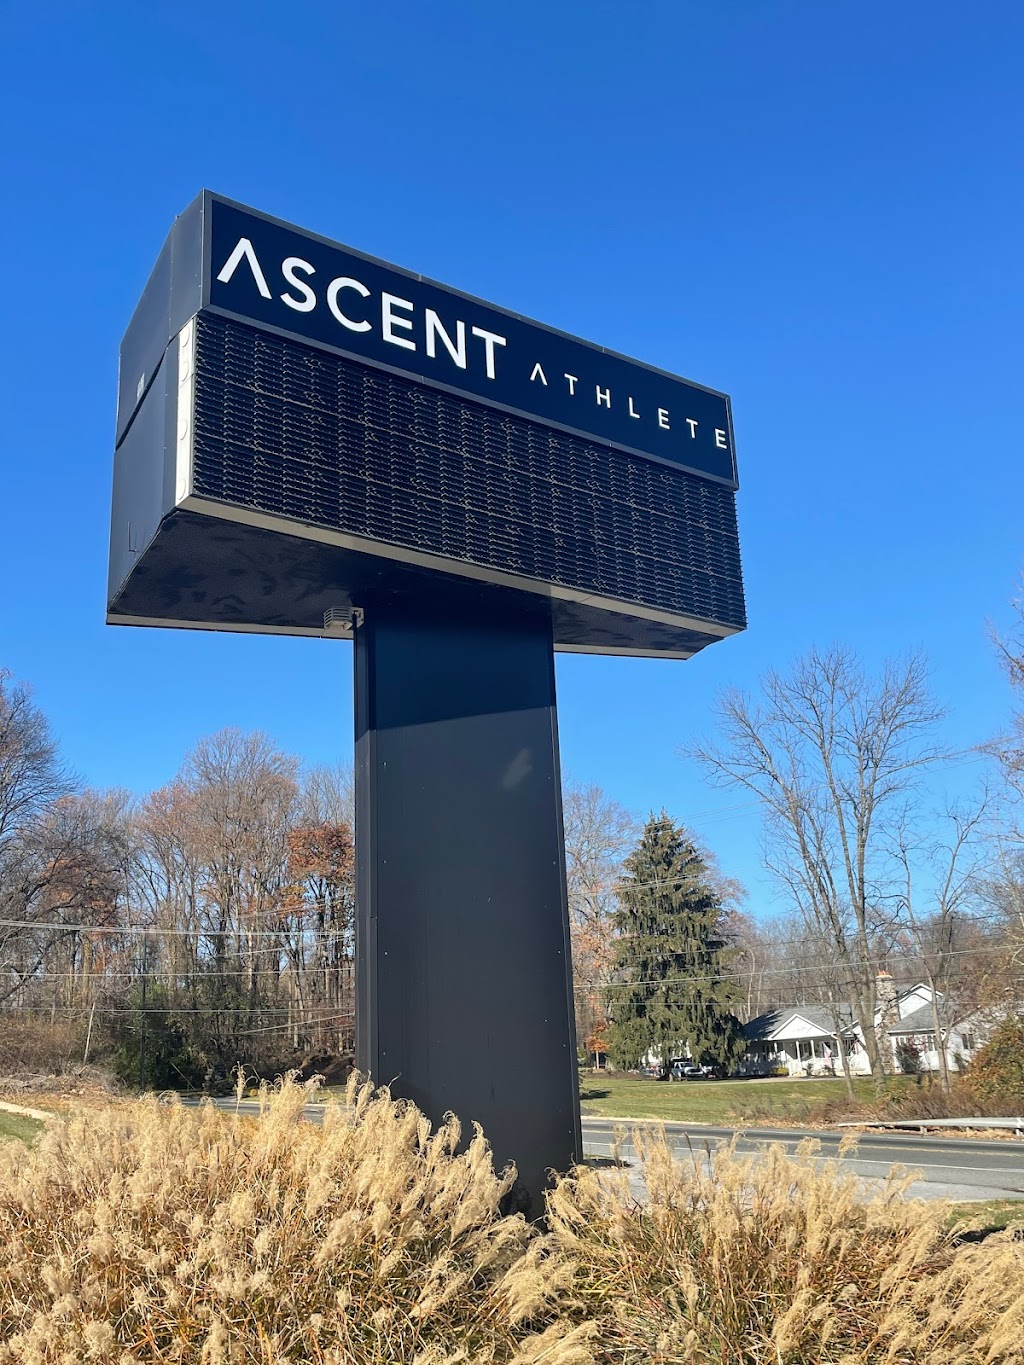 Ascent Athlete | 1451 Conchester Hwy, Garnet Valley, PA 19060 | Phone: (610) 358-5500